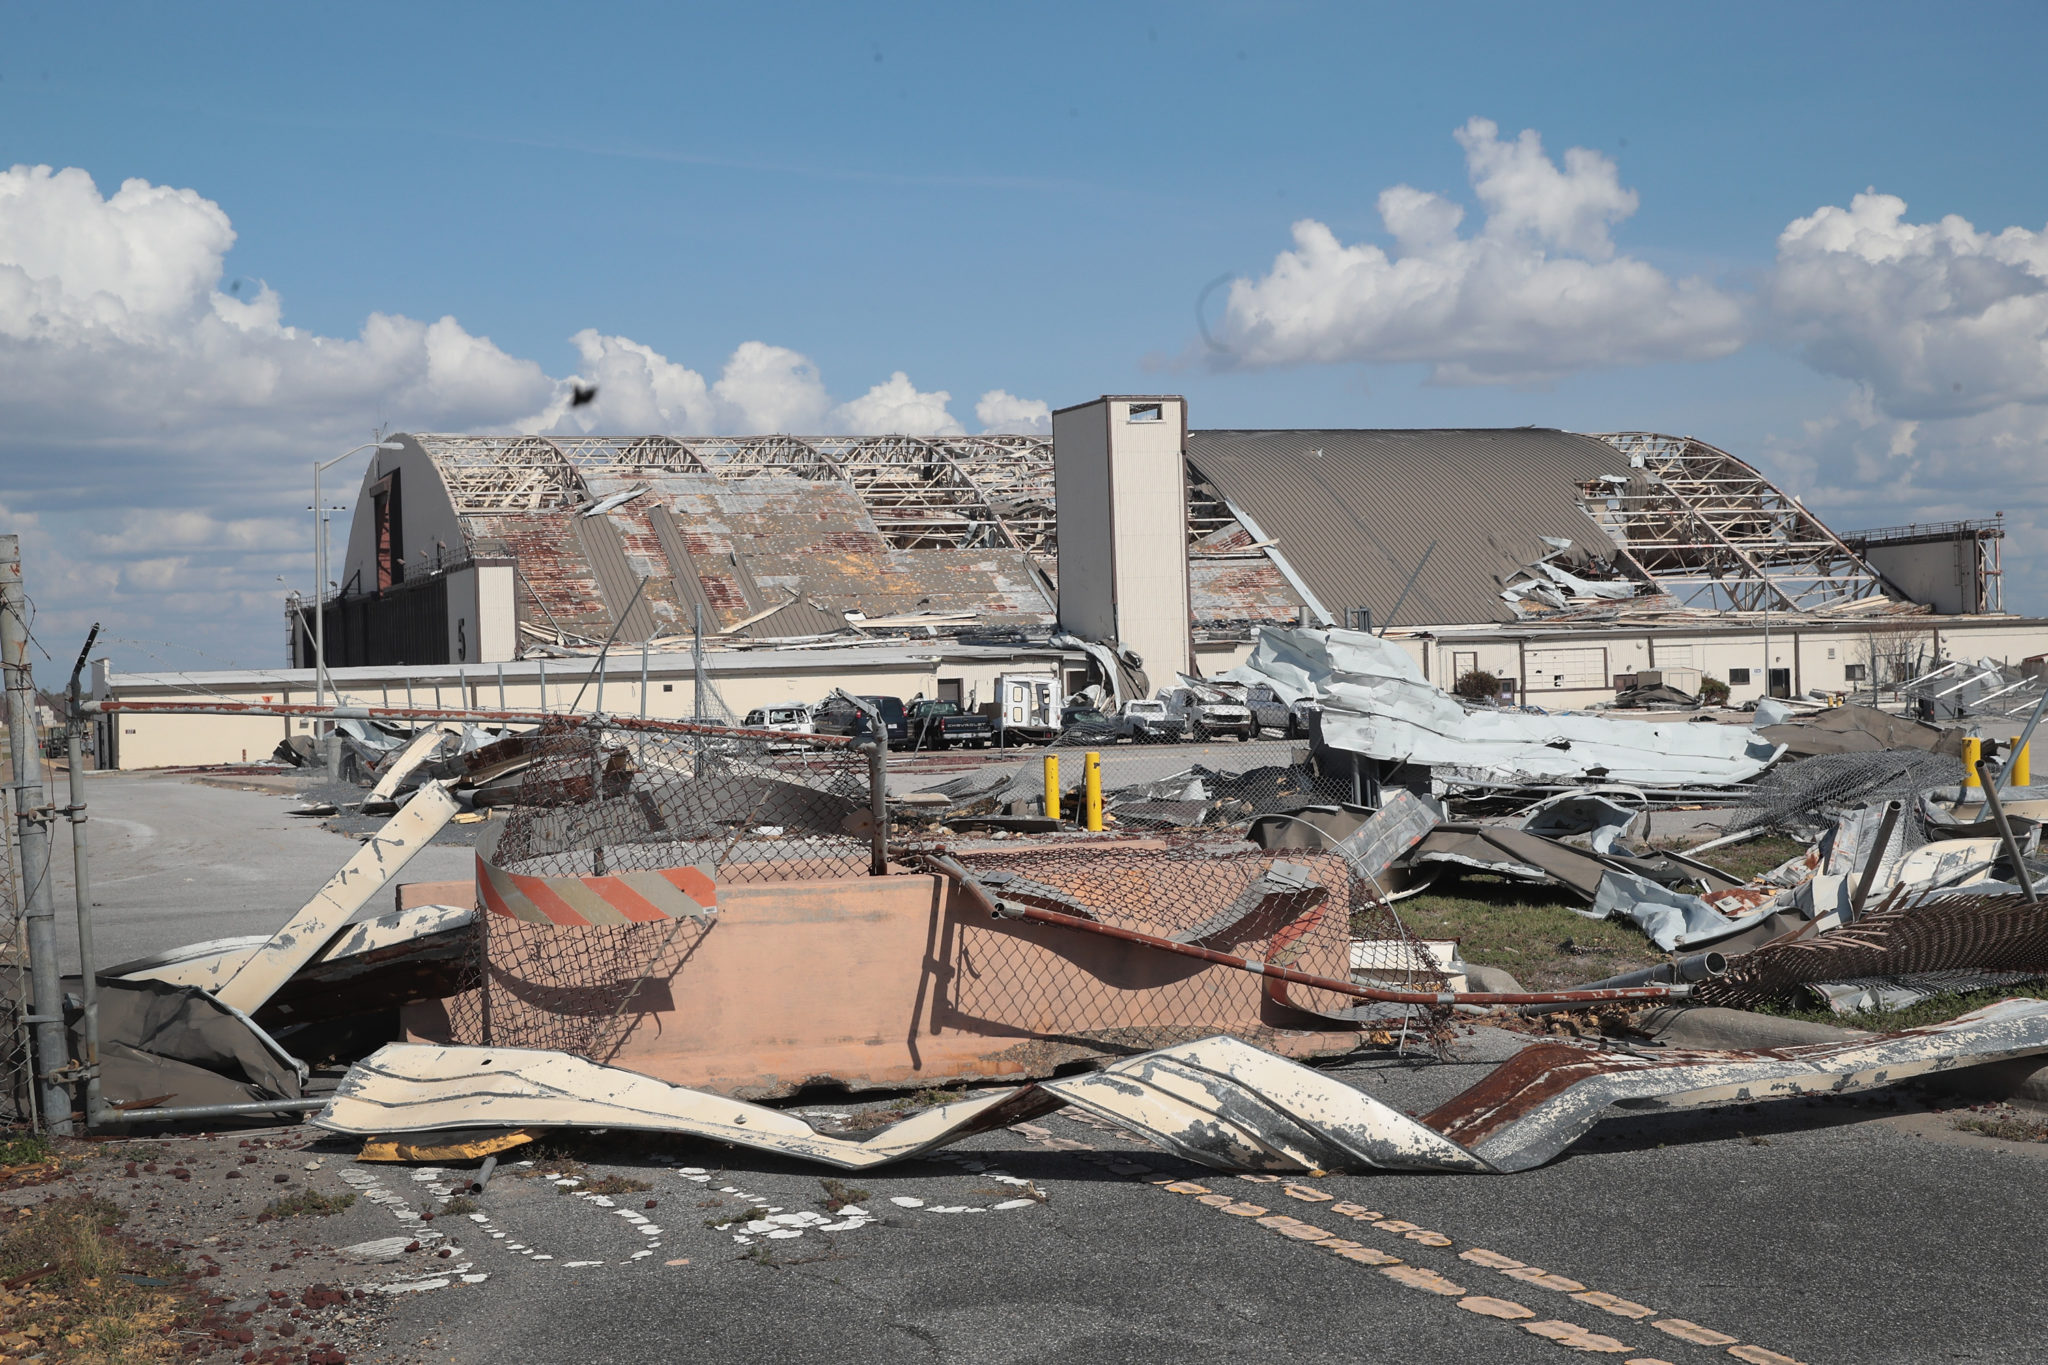 PANAMA CITY, FL - OCTOBER 17:  Debris litters Tyndall Air Force Base following Hurricane Michael on October 17, 2018 in Panama City, Florida. the base experienced extensive damage from the storm. Hurricane Michael slammed into the Florida Panhandle on October 10, as a category 4 storm causing massive damage and claiming nearly 30  lives.  (Photo by Scott Olson/Getty Images)